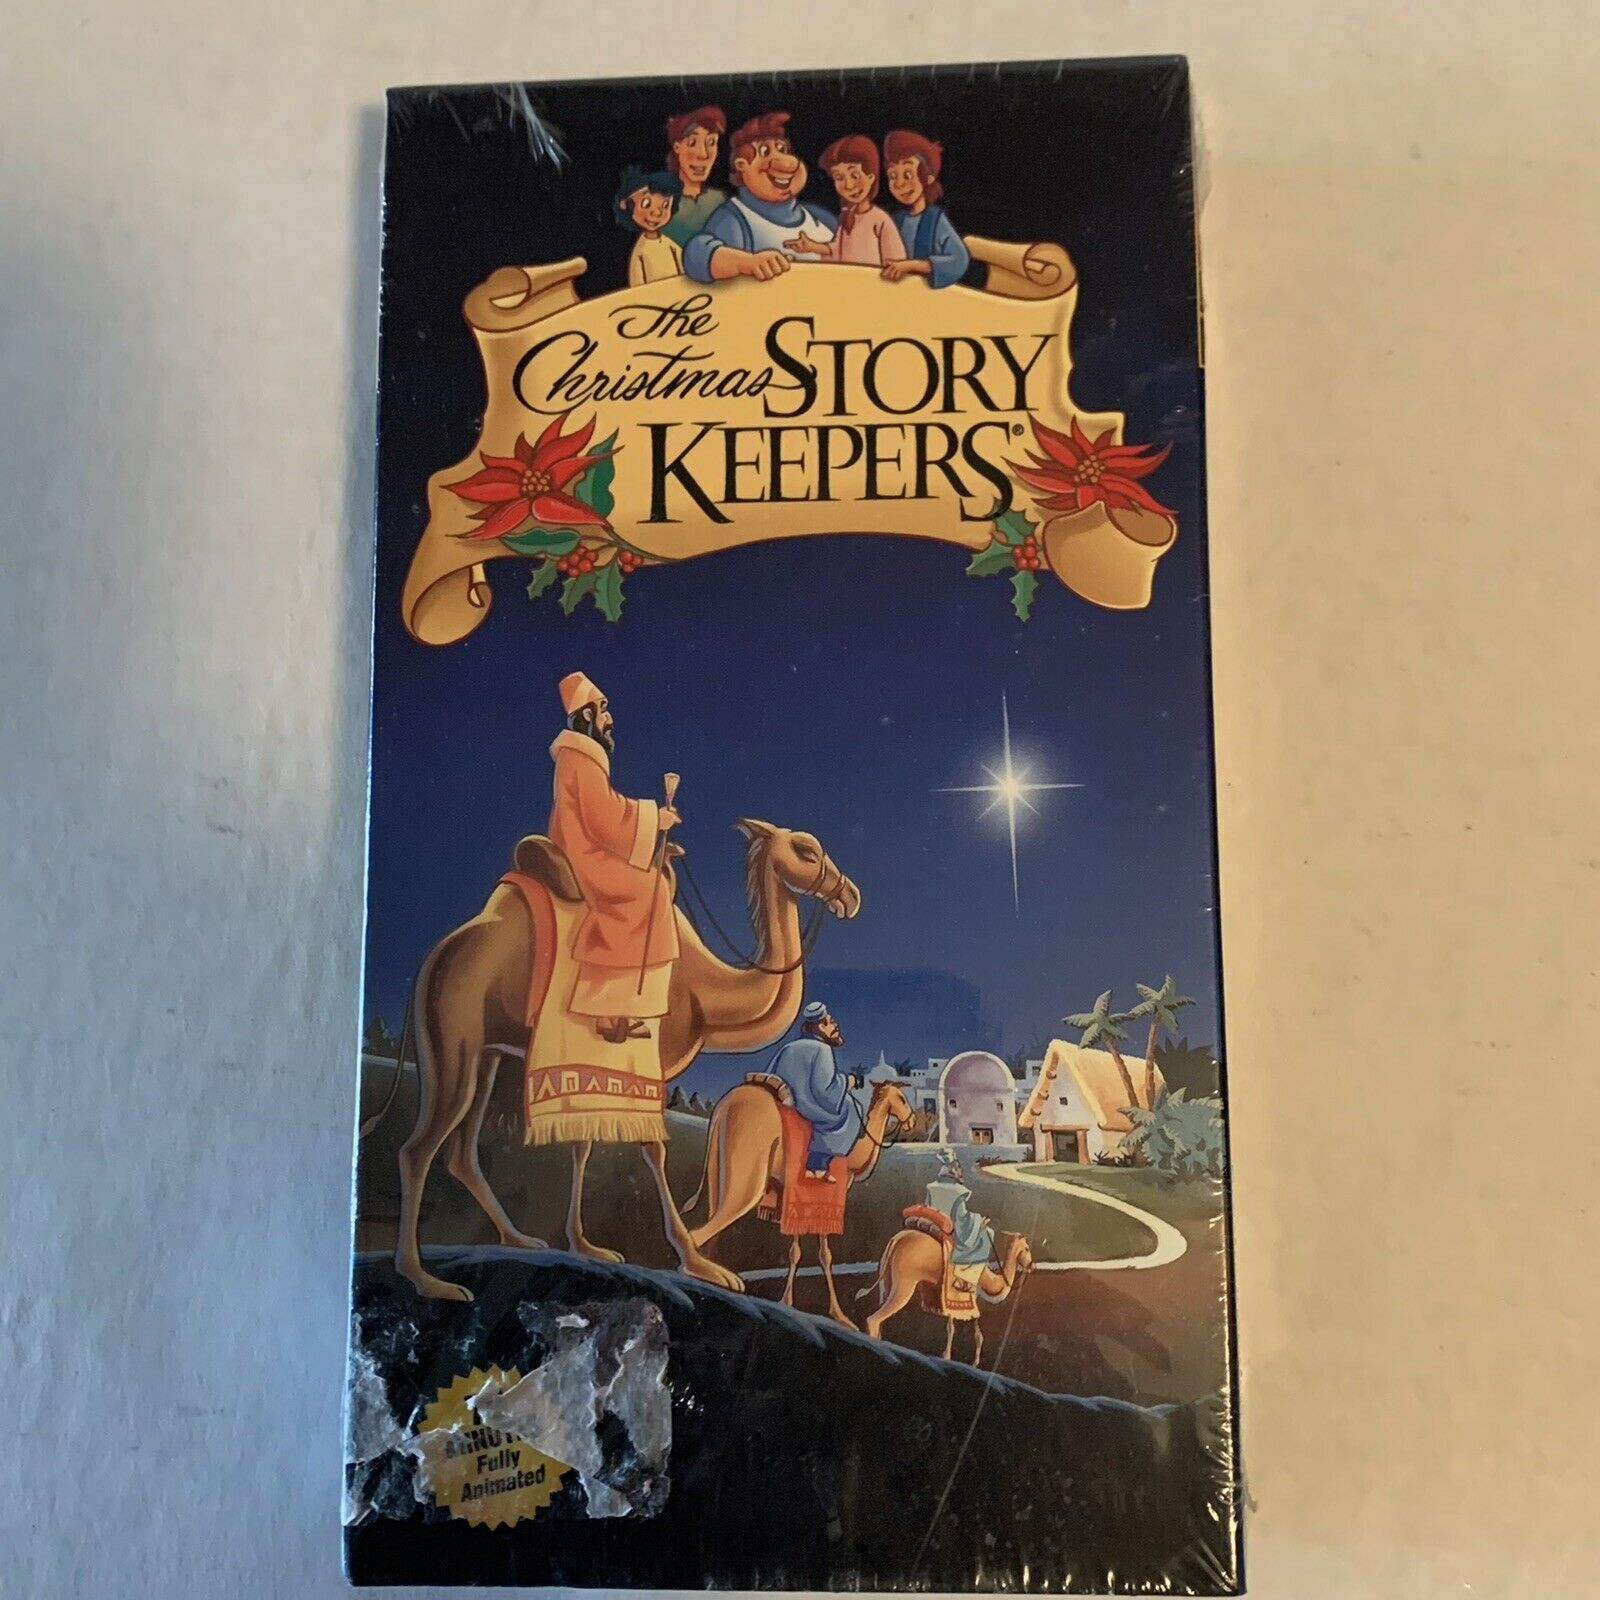 Primary image for The Christmas Story Keepers VHS #82-0327